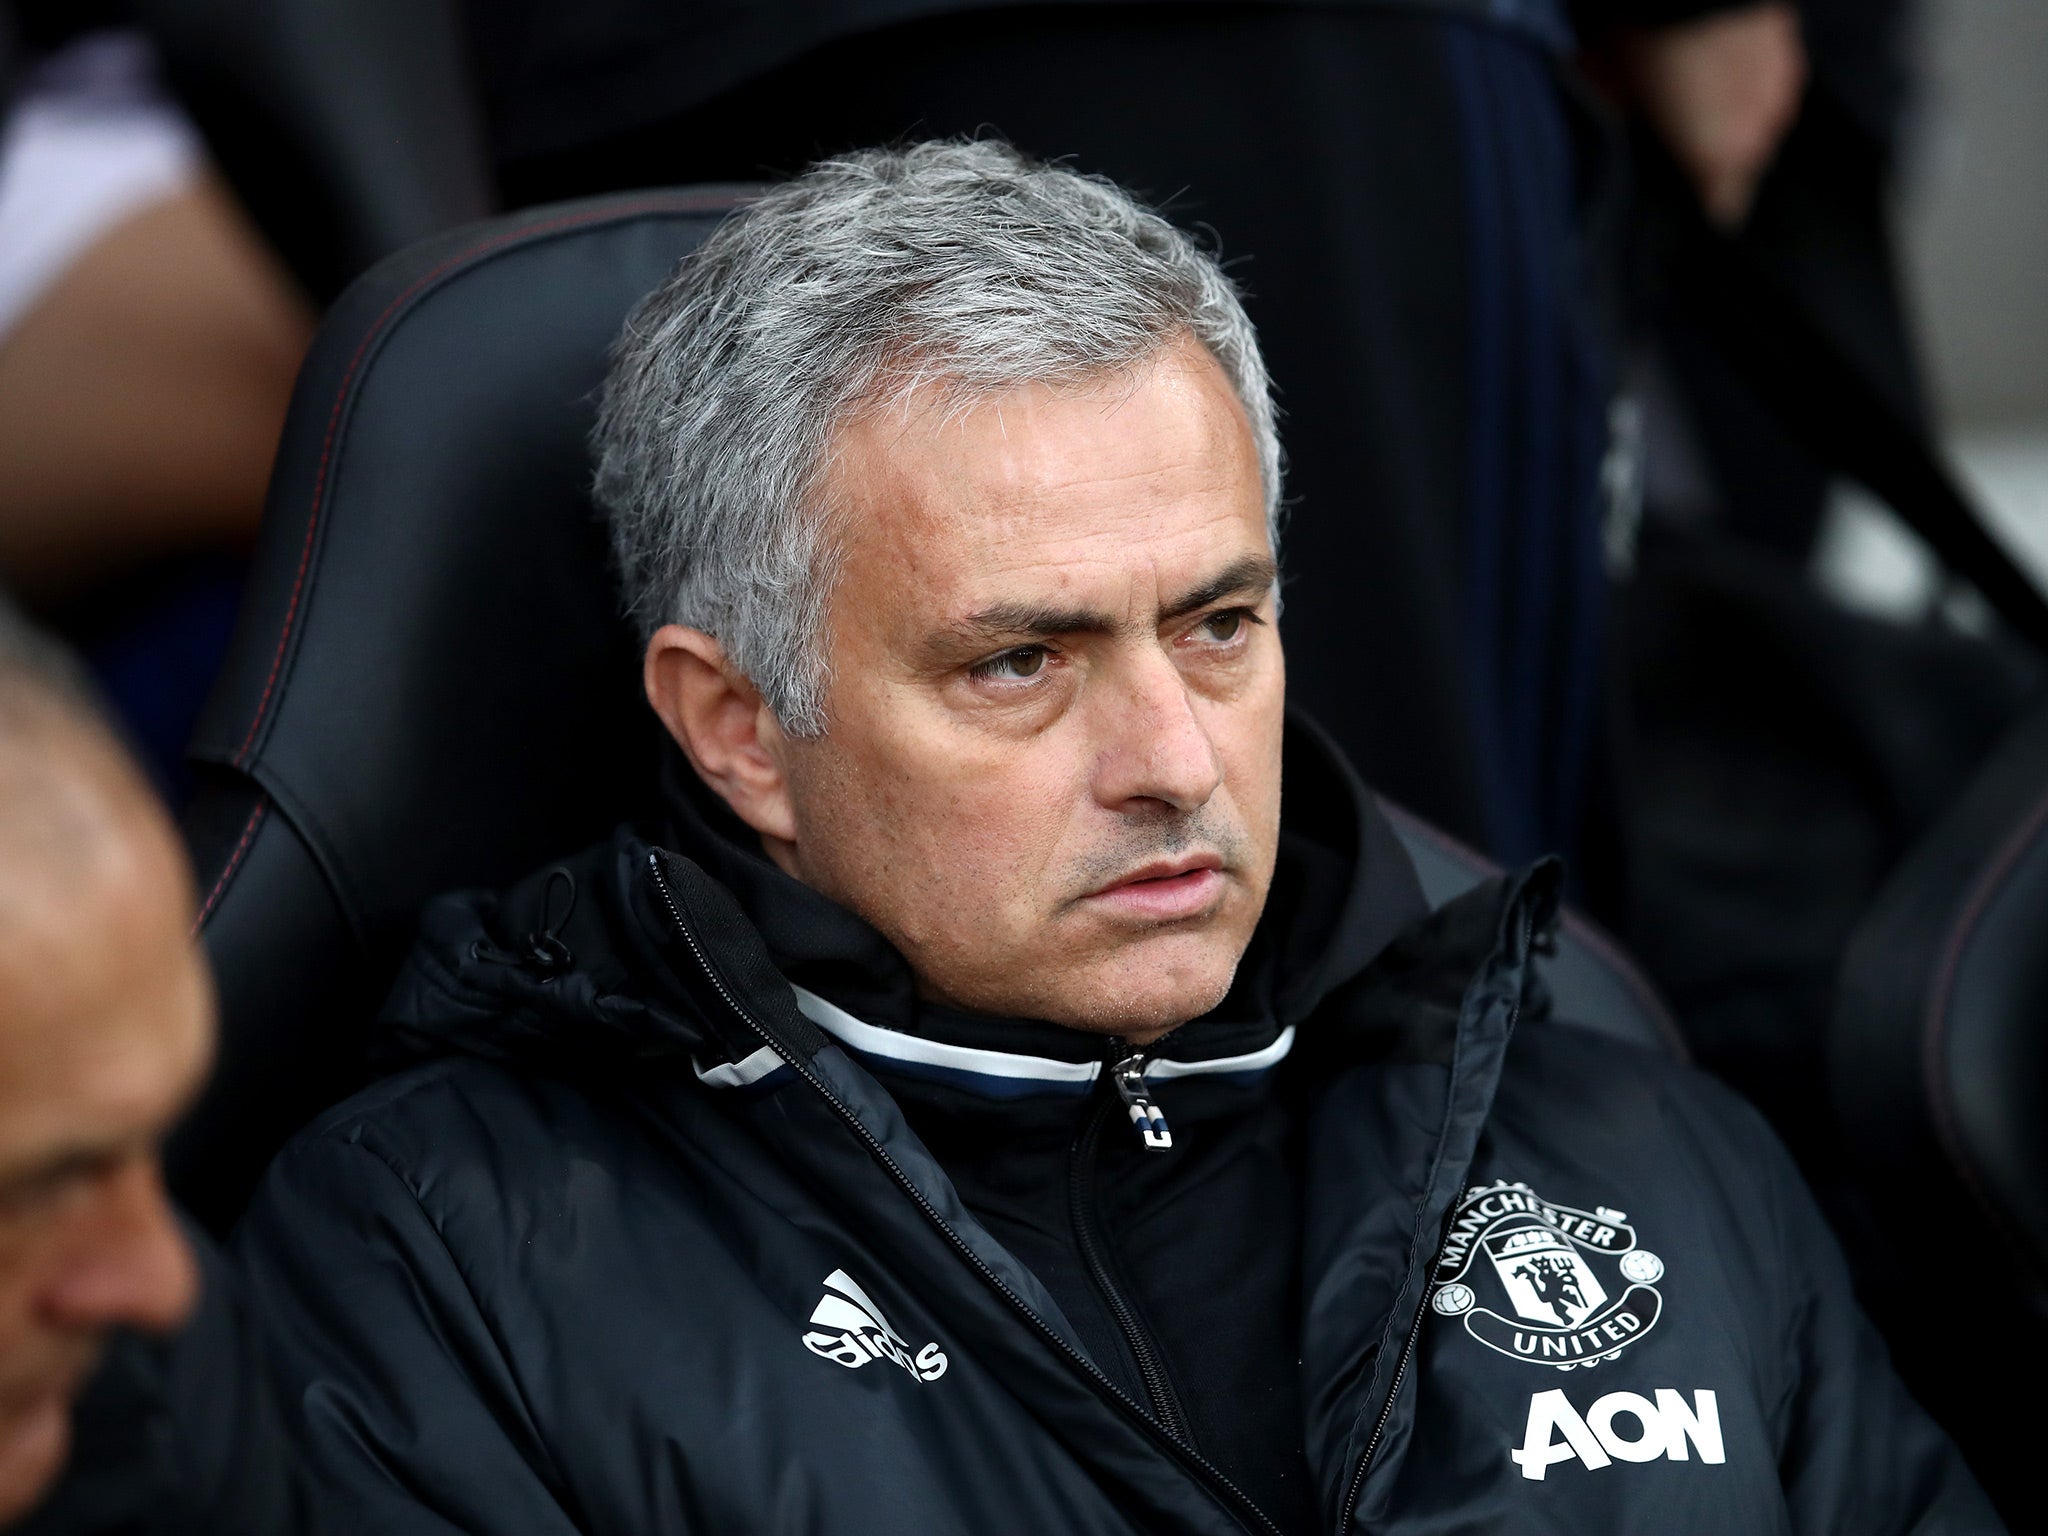 Jose Mourinho believes he has no option but to put his faith in youth